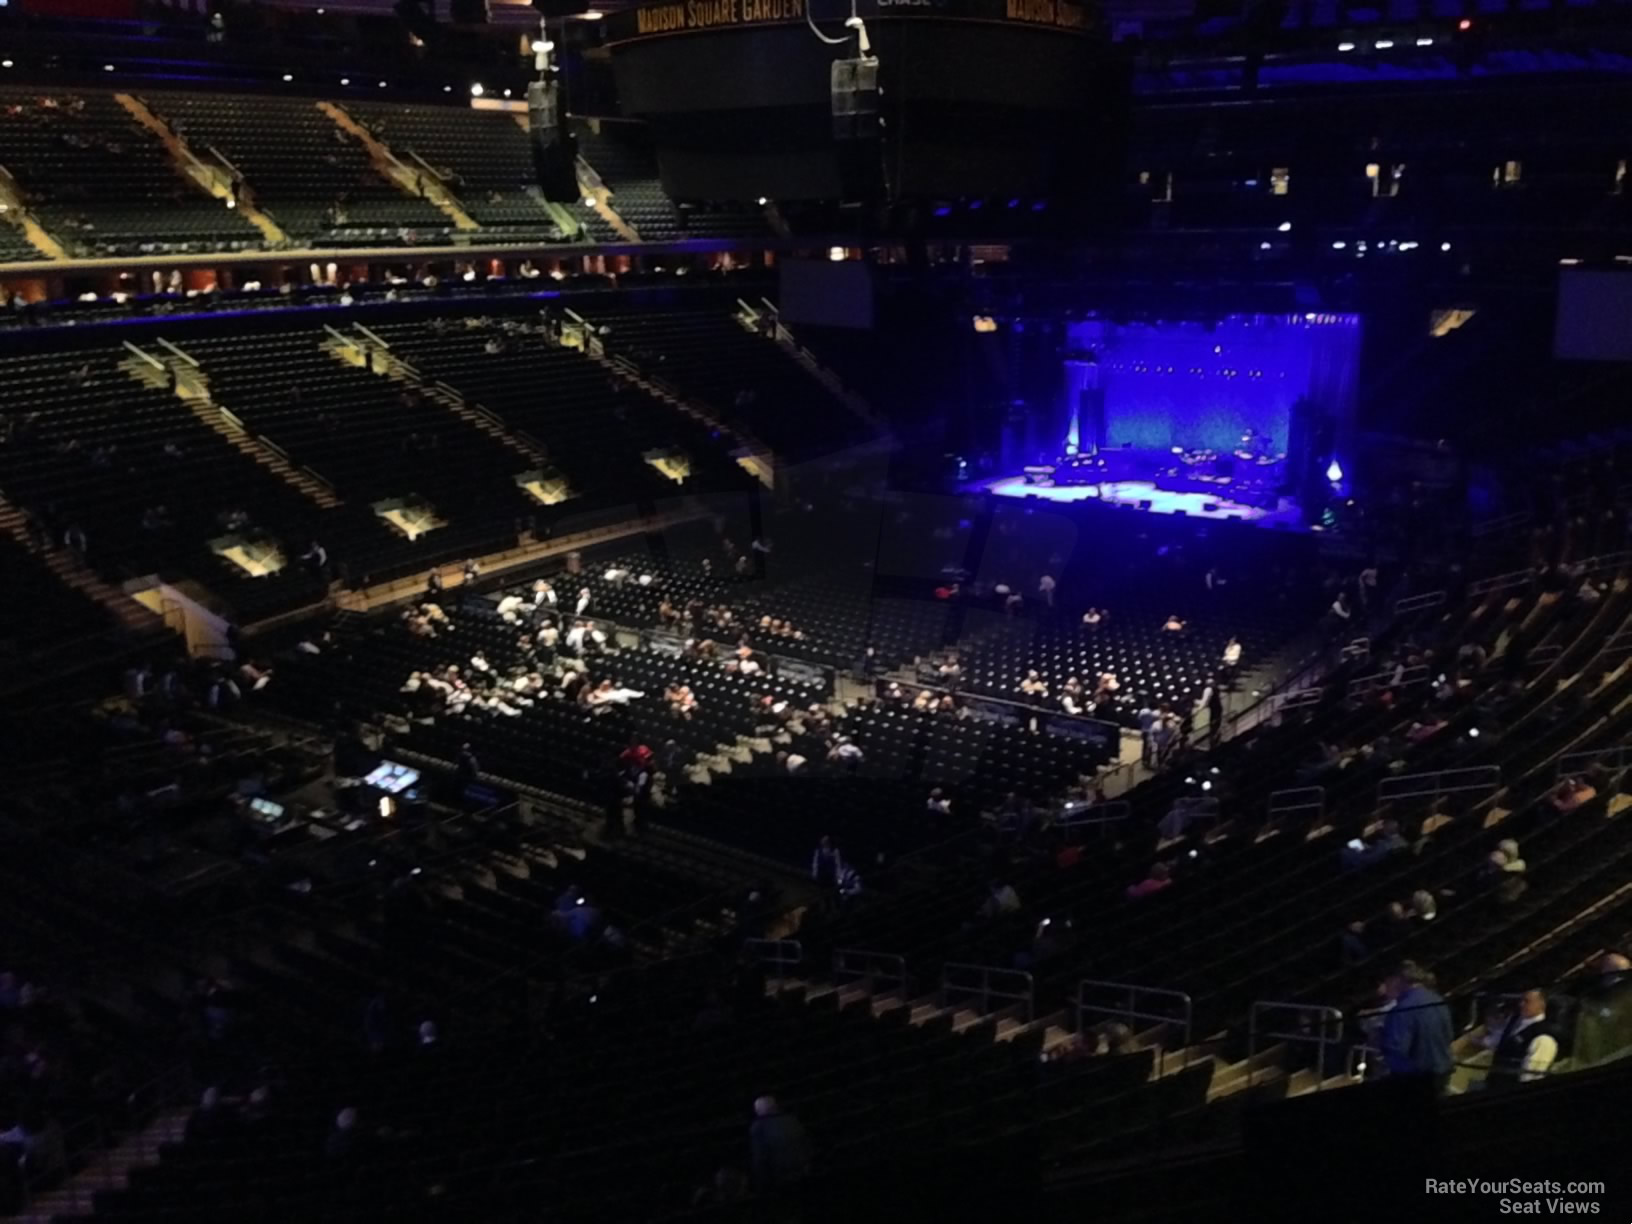 section 207, row 2 seat view  for concert - madison square garden